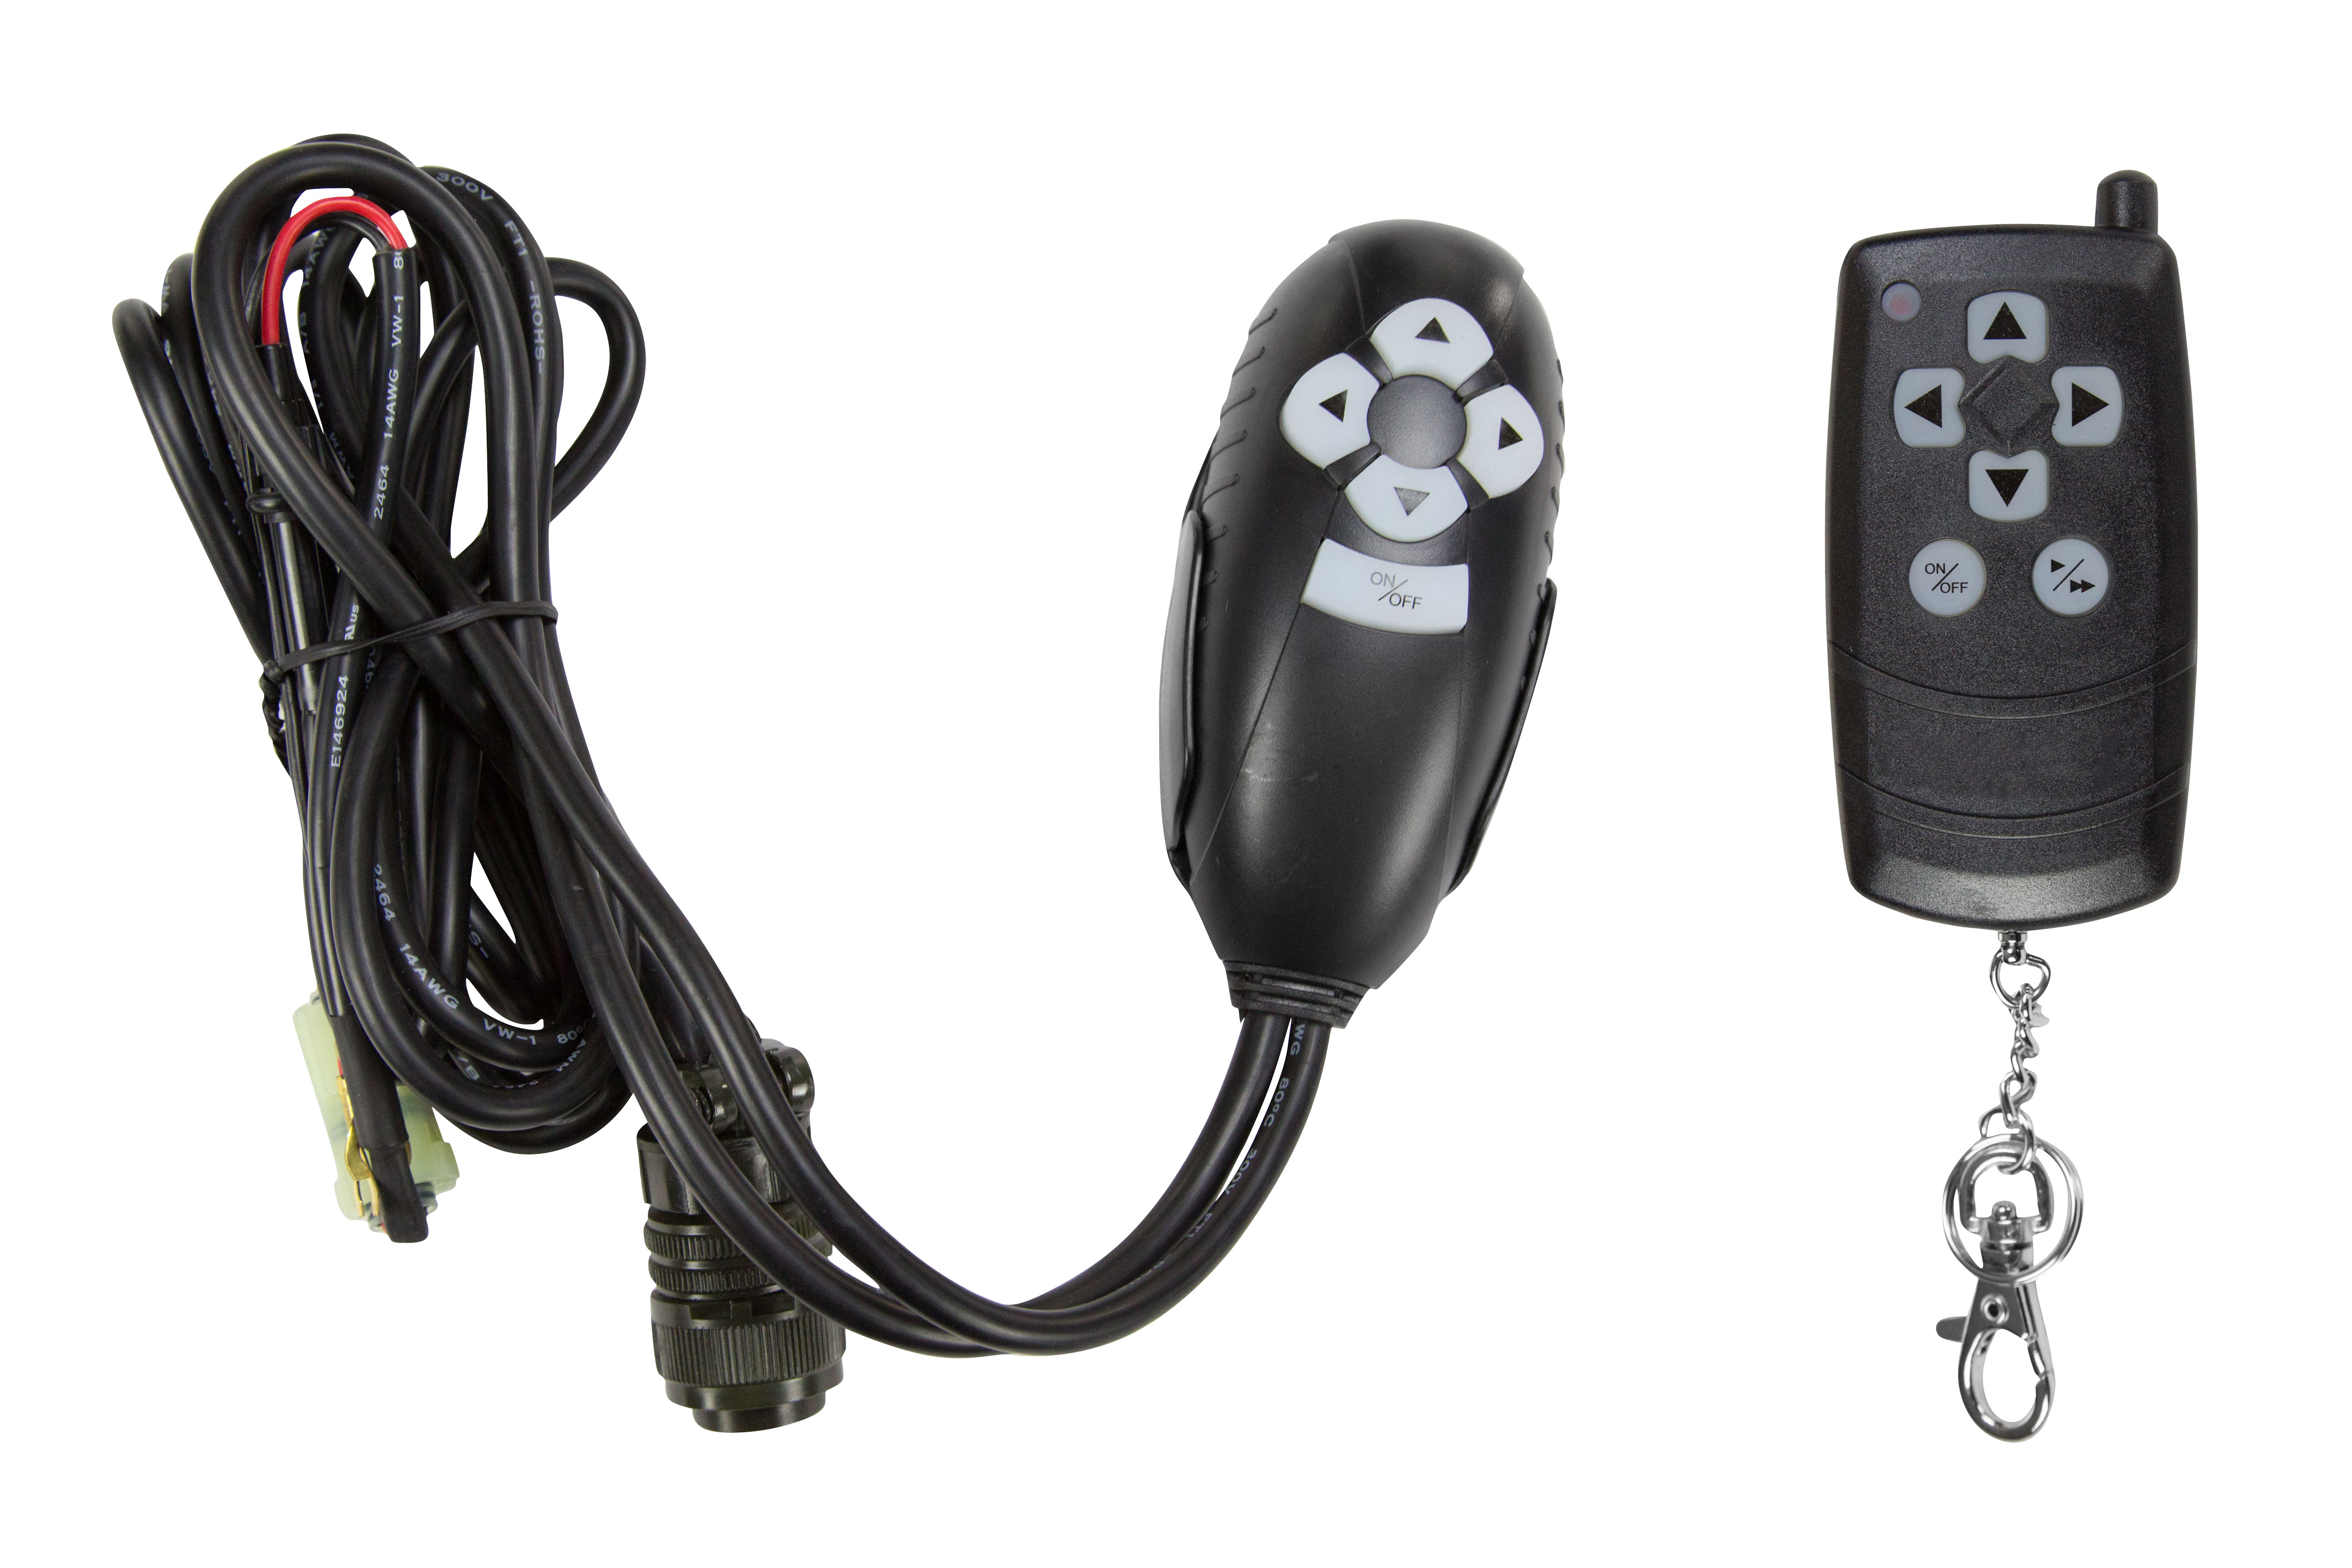 Pan Tilt Base Enables Remote Controlling for Lights, Cameras, and other Equipment